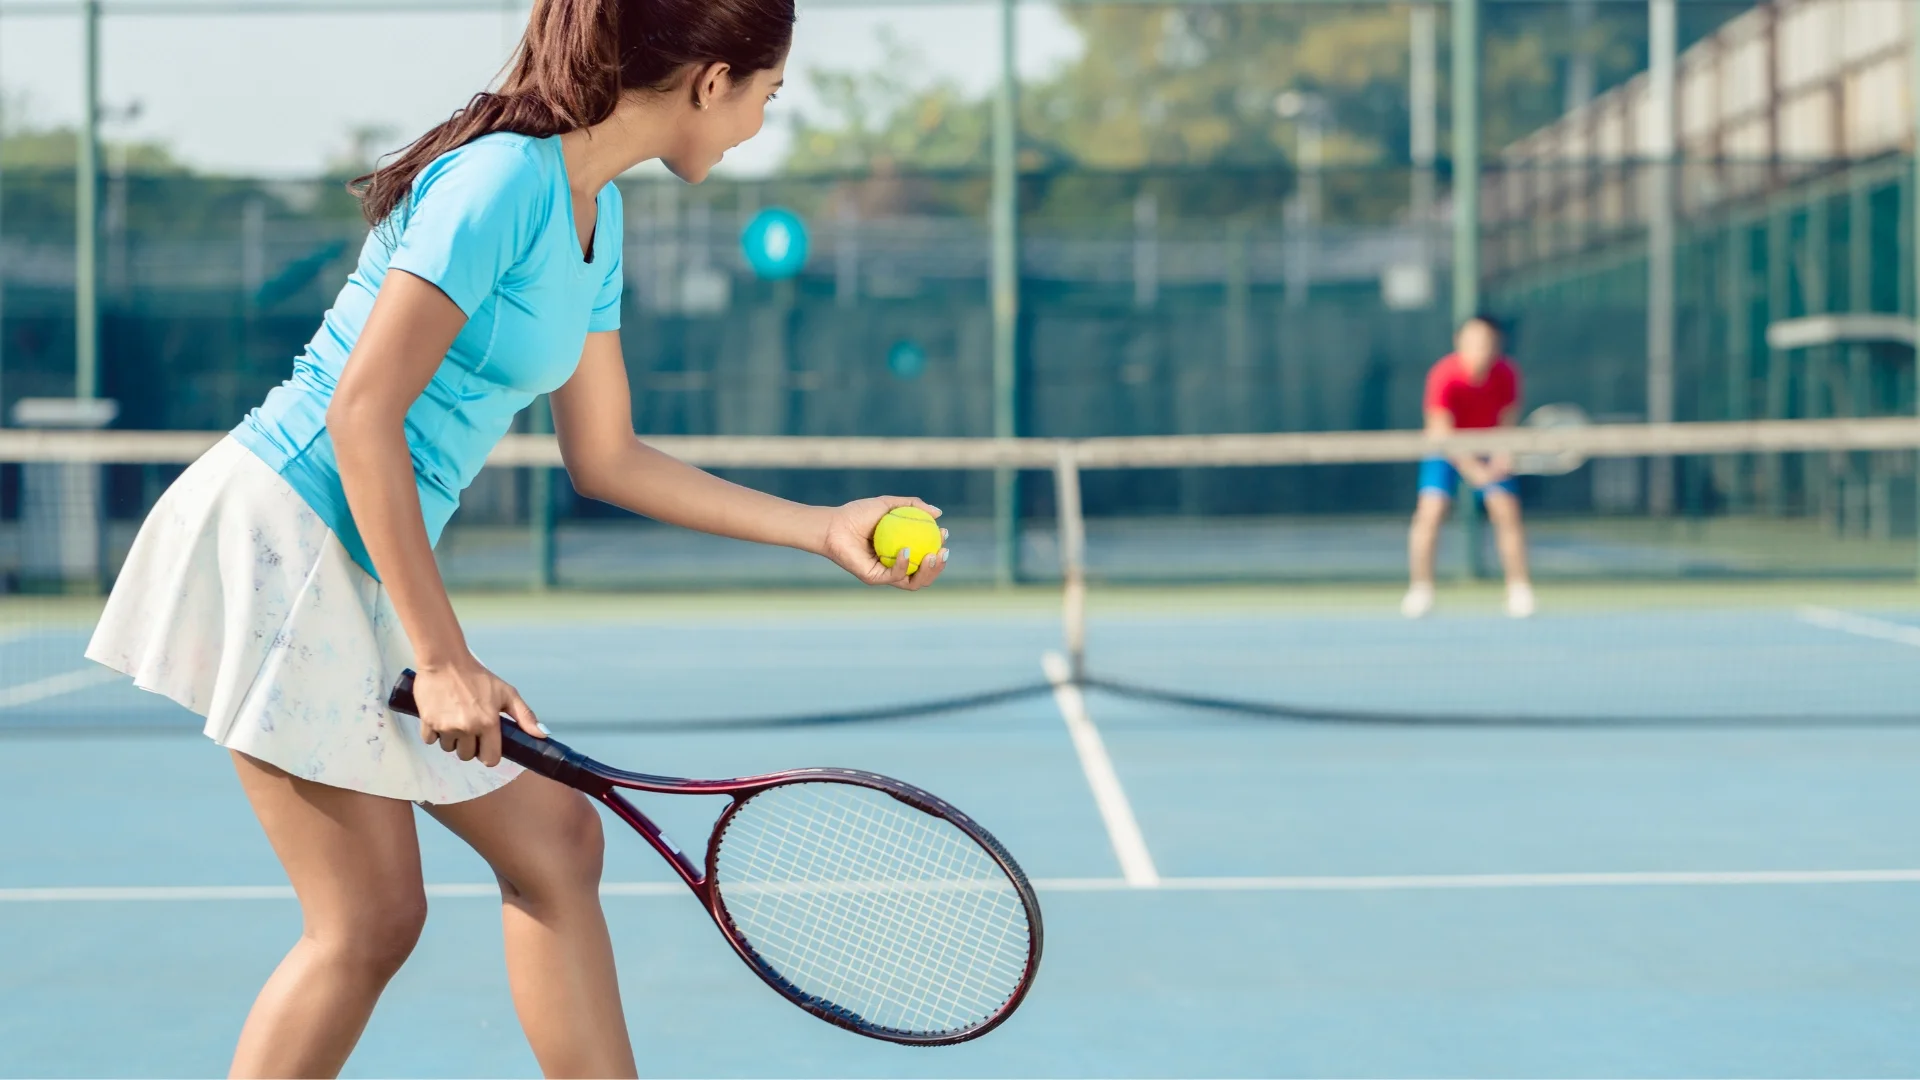 A woman confidently holds a tennis racket and a ball, ready to play a thrilling game on the court. Motivation to Exercise